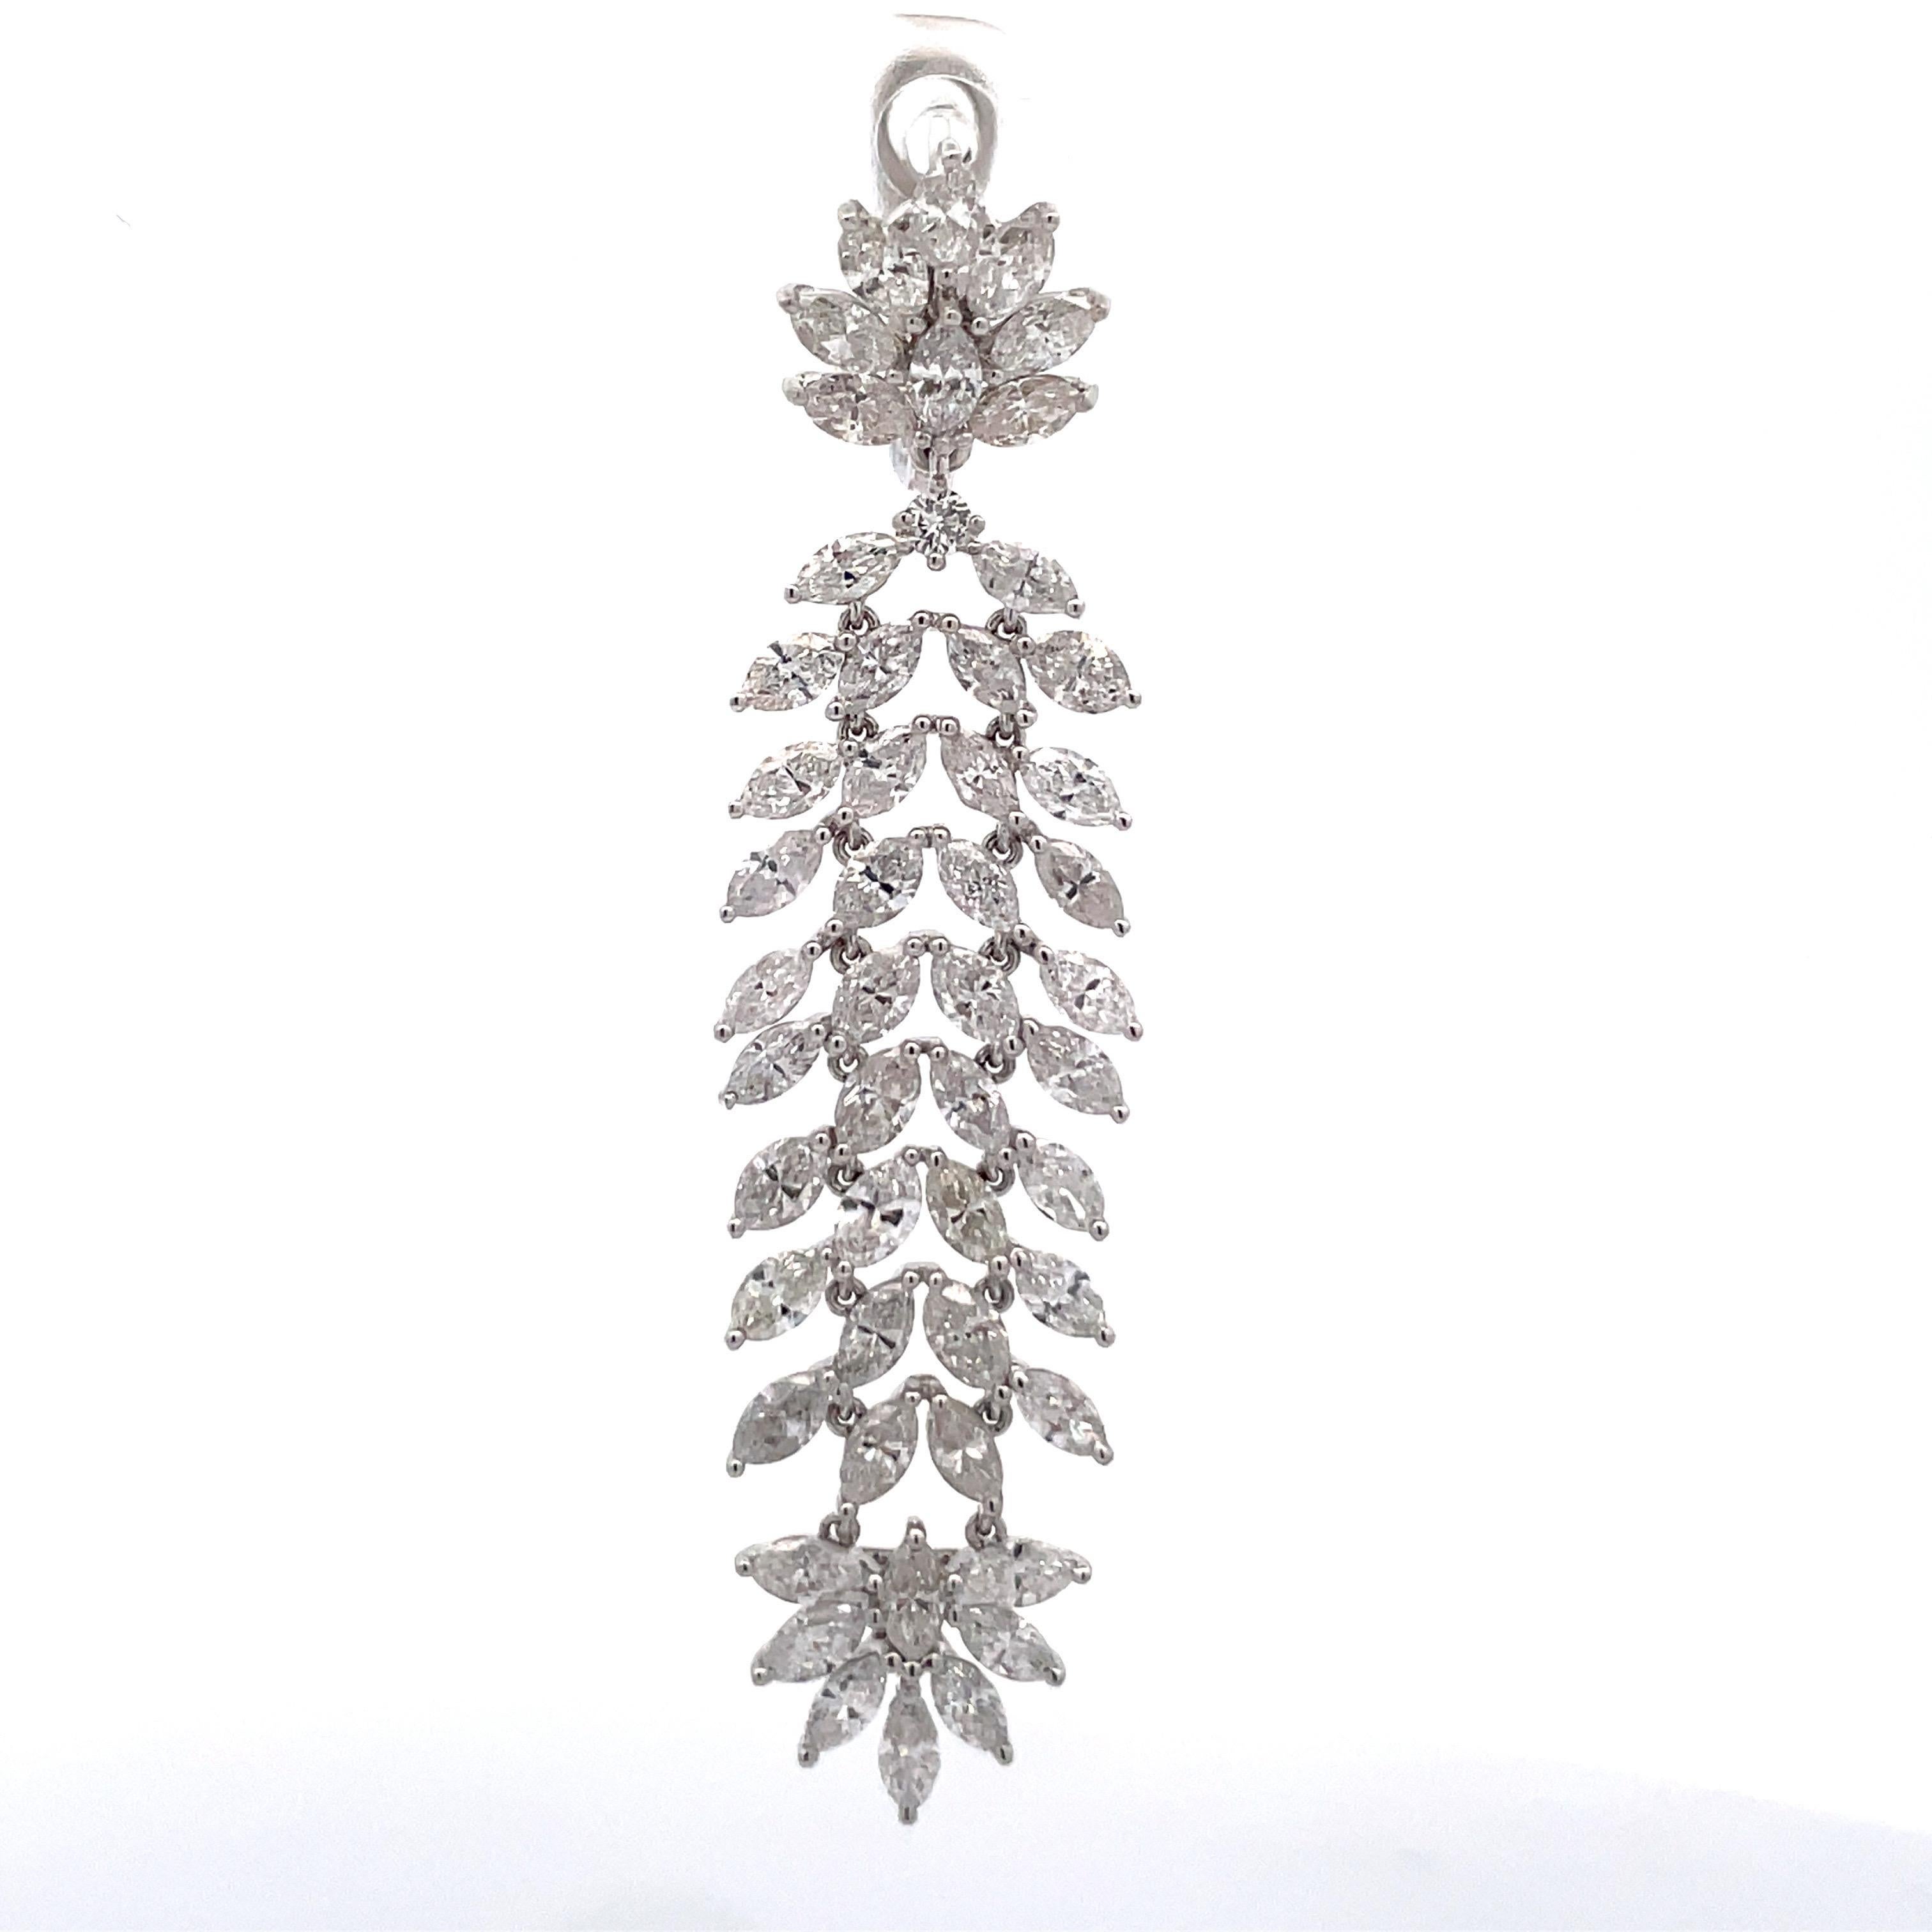 18 Karat White Gold drop earrings featuring a cluster of Marquise Cut diamonds weighing 7.81 Carats.
Nice Movement, not stiff at all.

DM for more videos & pictures.